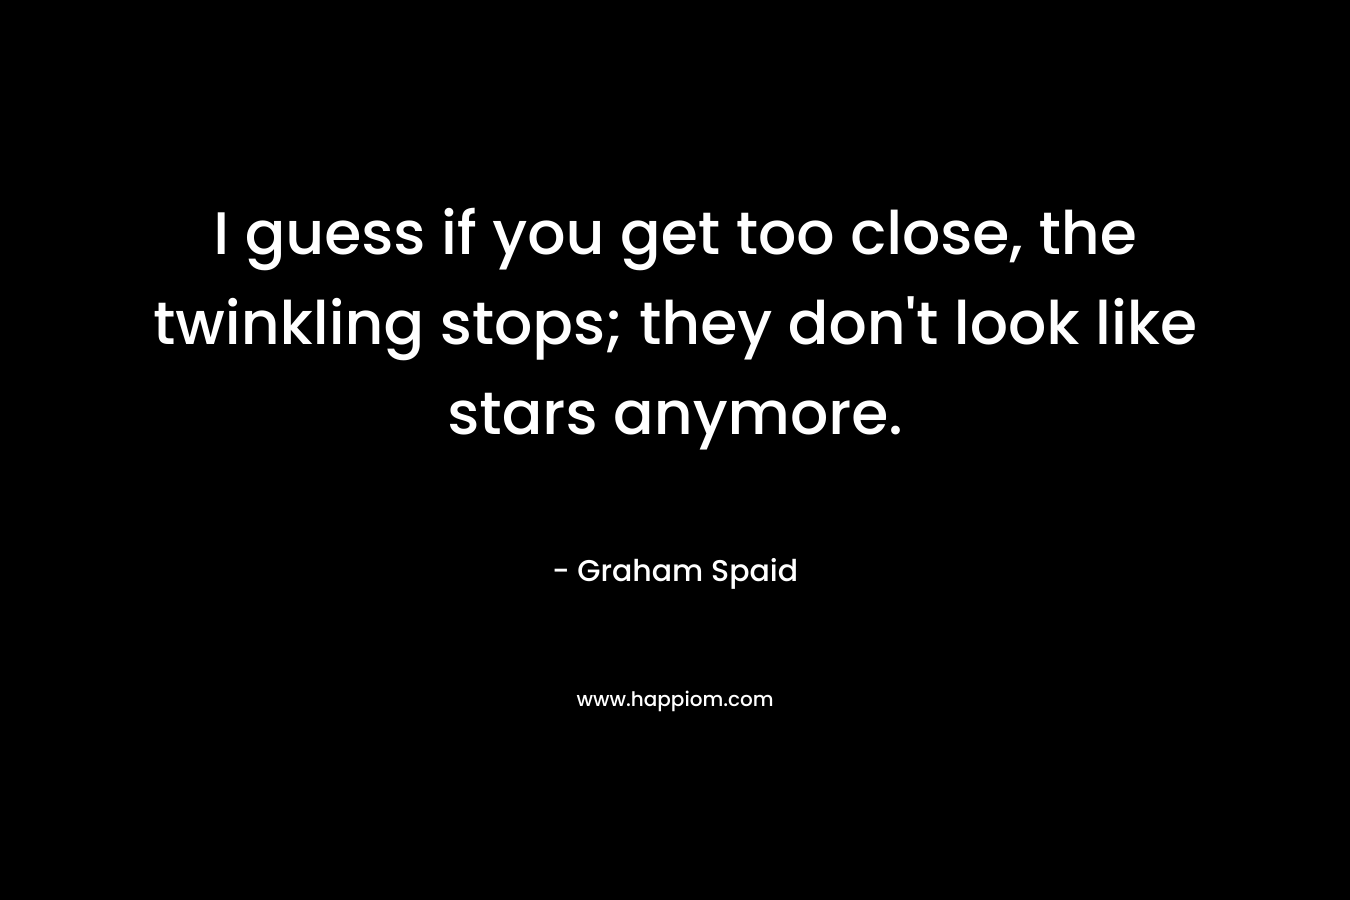 I guess if you get too close, the twinkling stops; they don’t look like stars anymore. – Graham Spaid